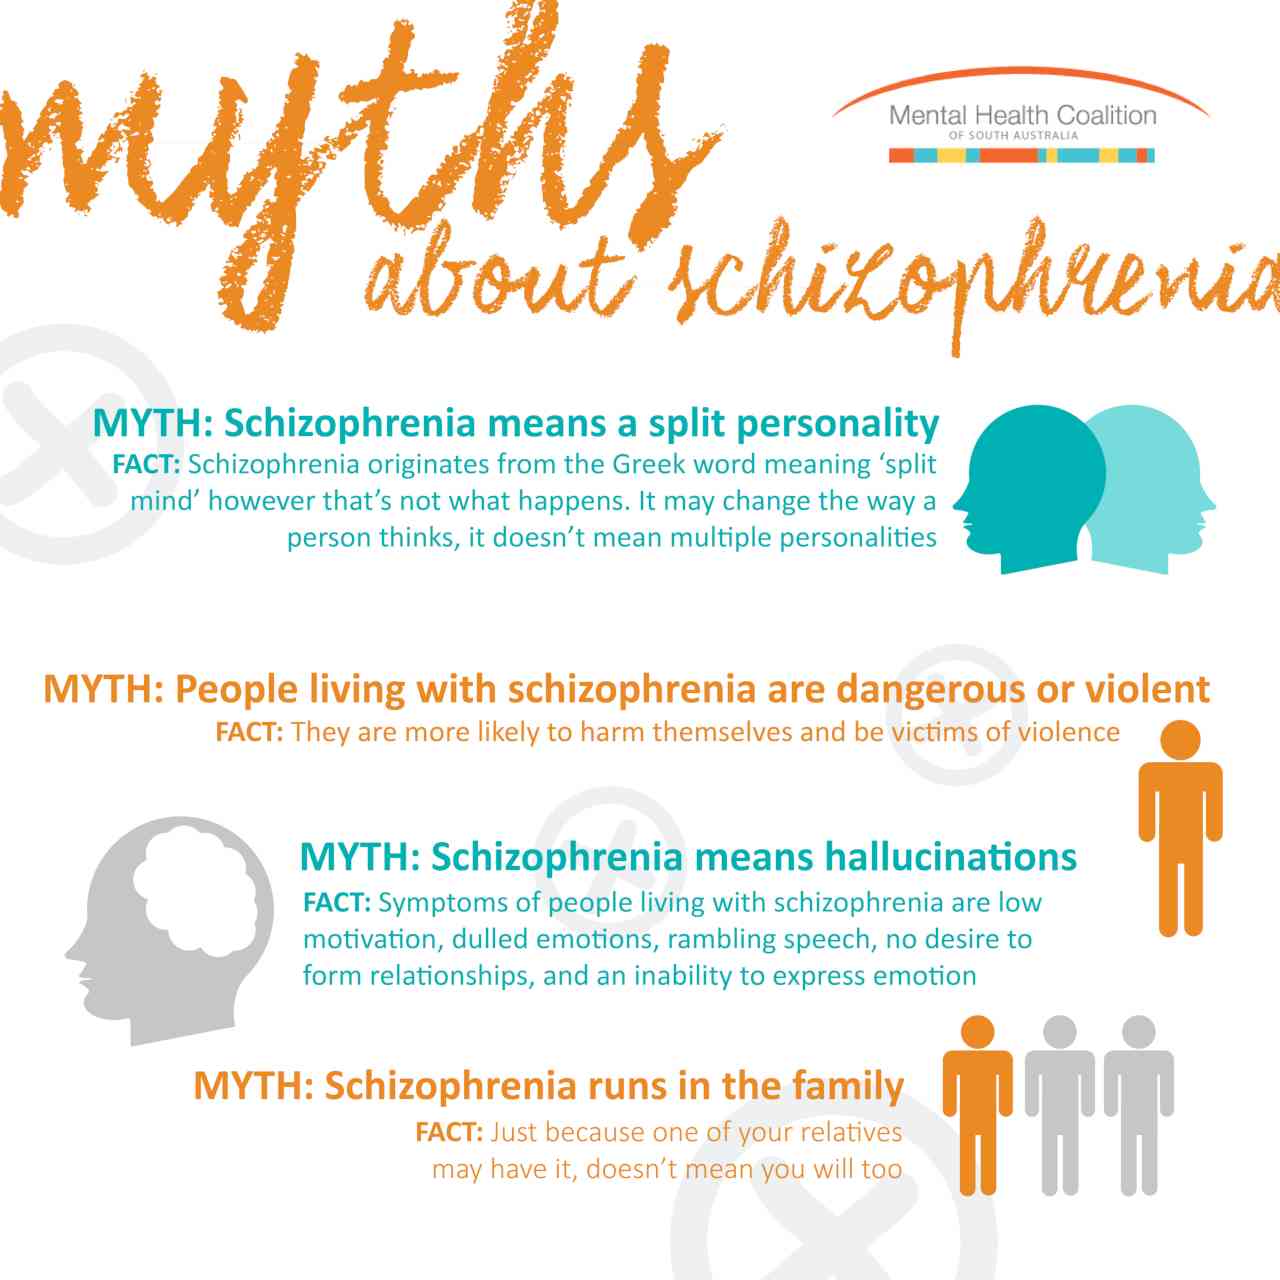 Myths about schizophrenia. Image credit: Mental Health Centre of South Australia